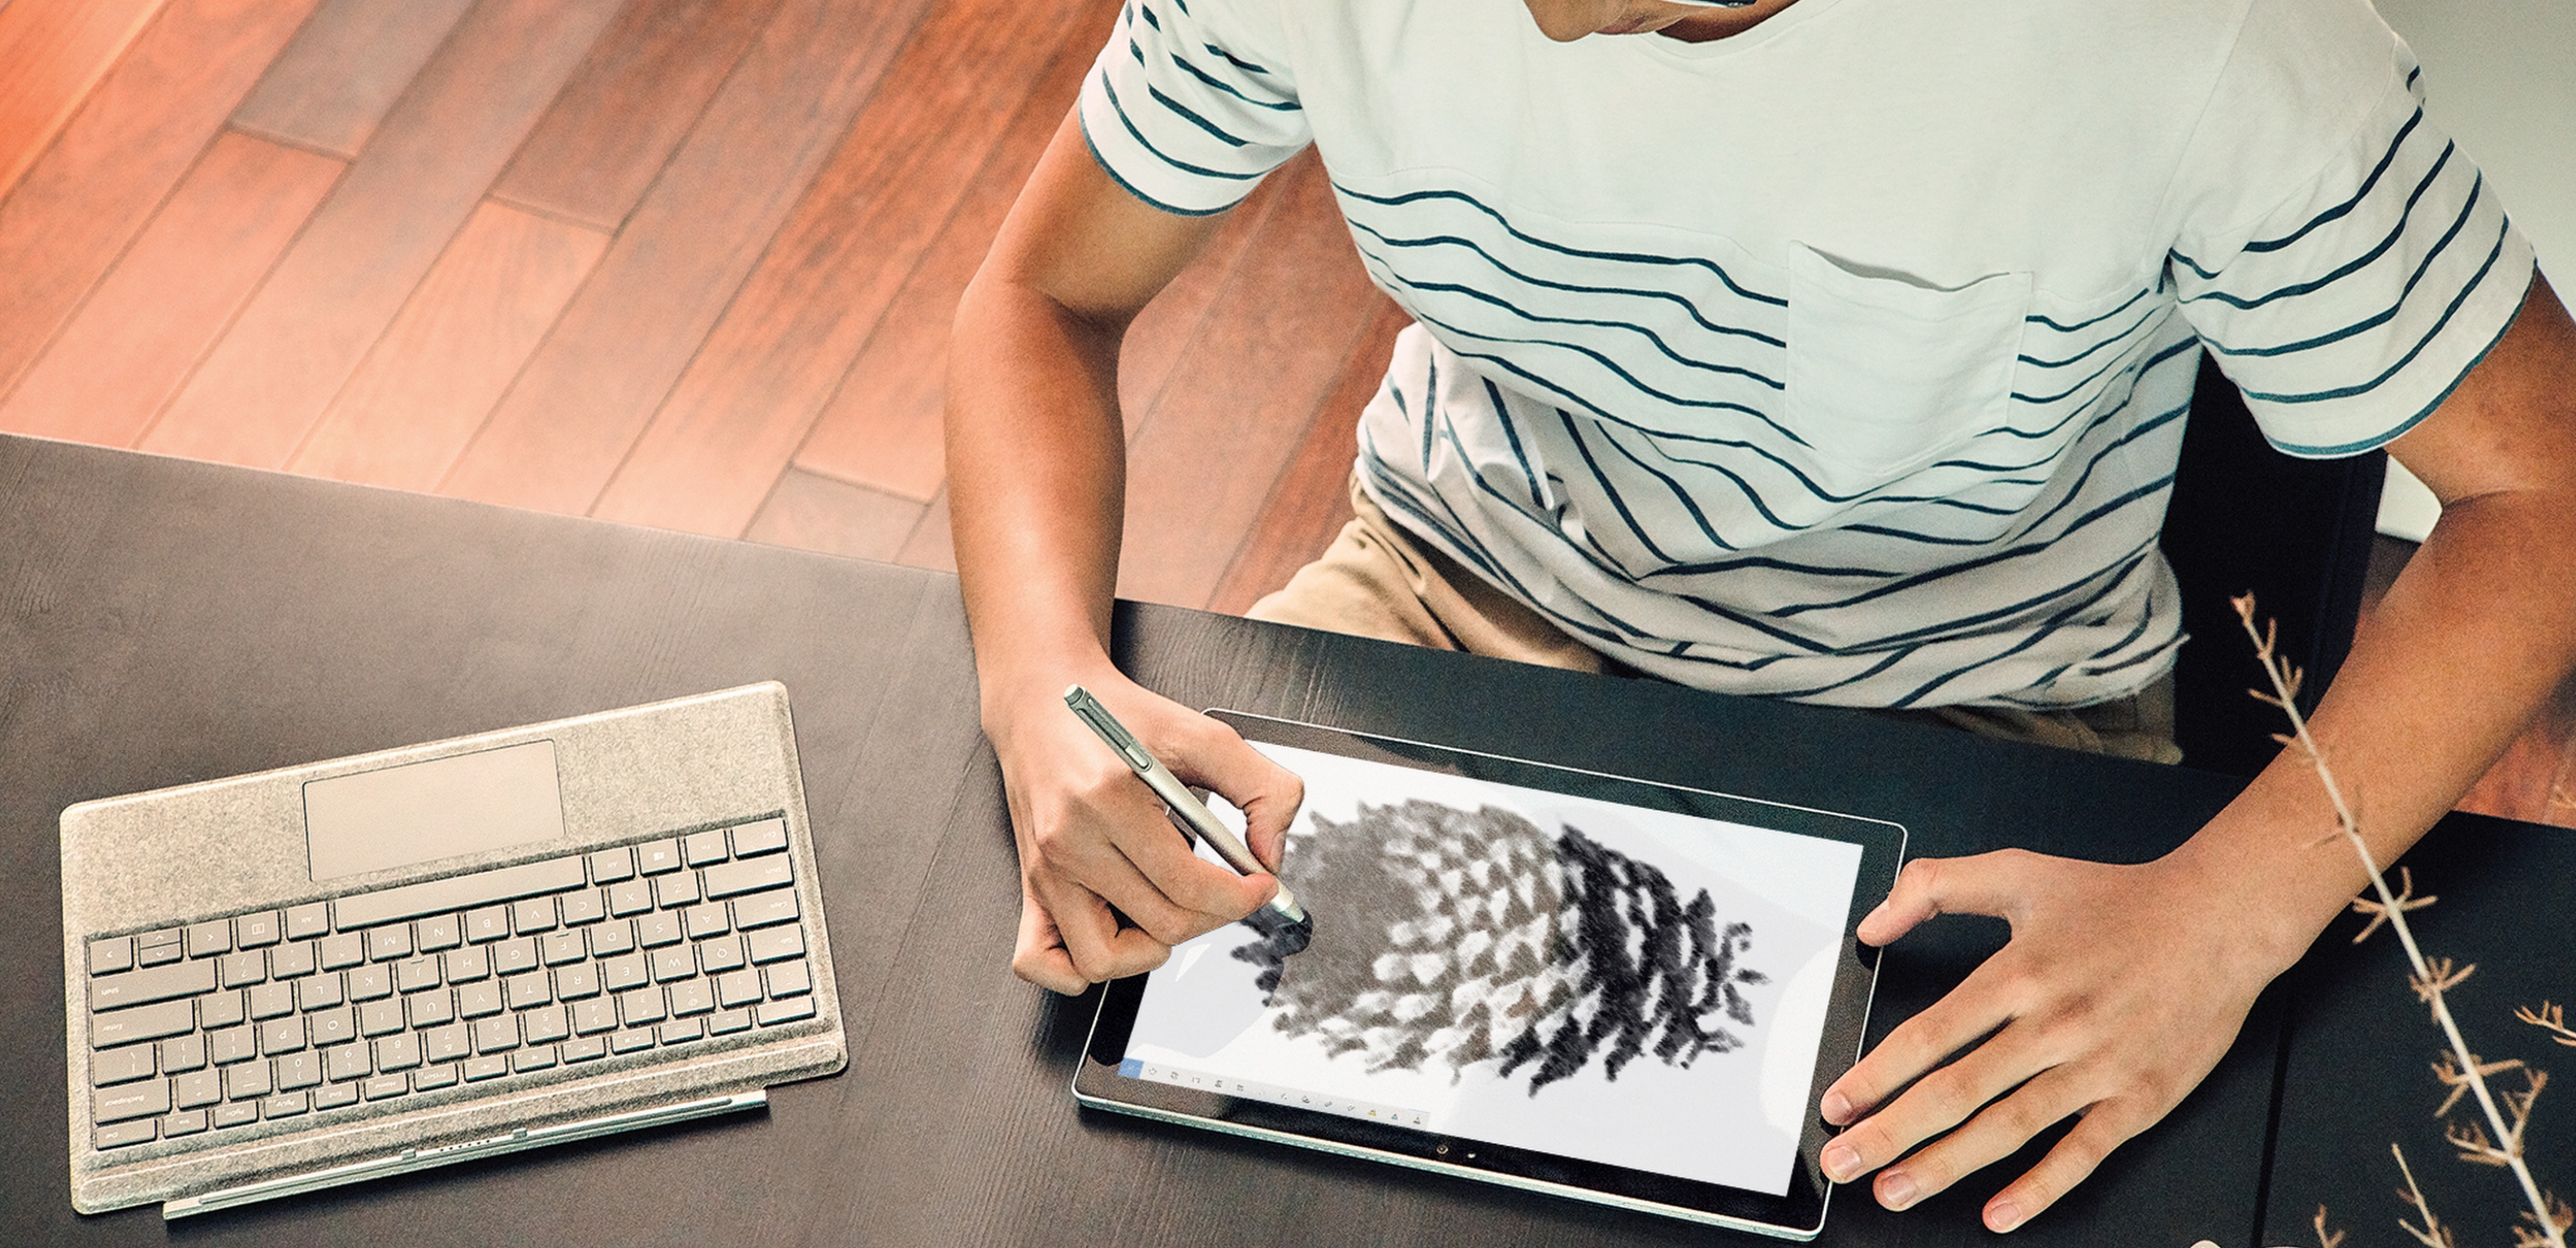 Man sitting at a desk drawing on a Surface with Surface Pen.